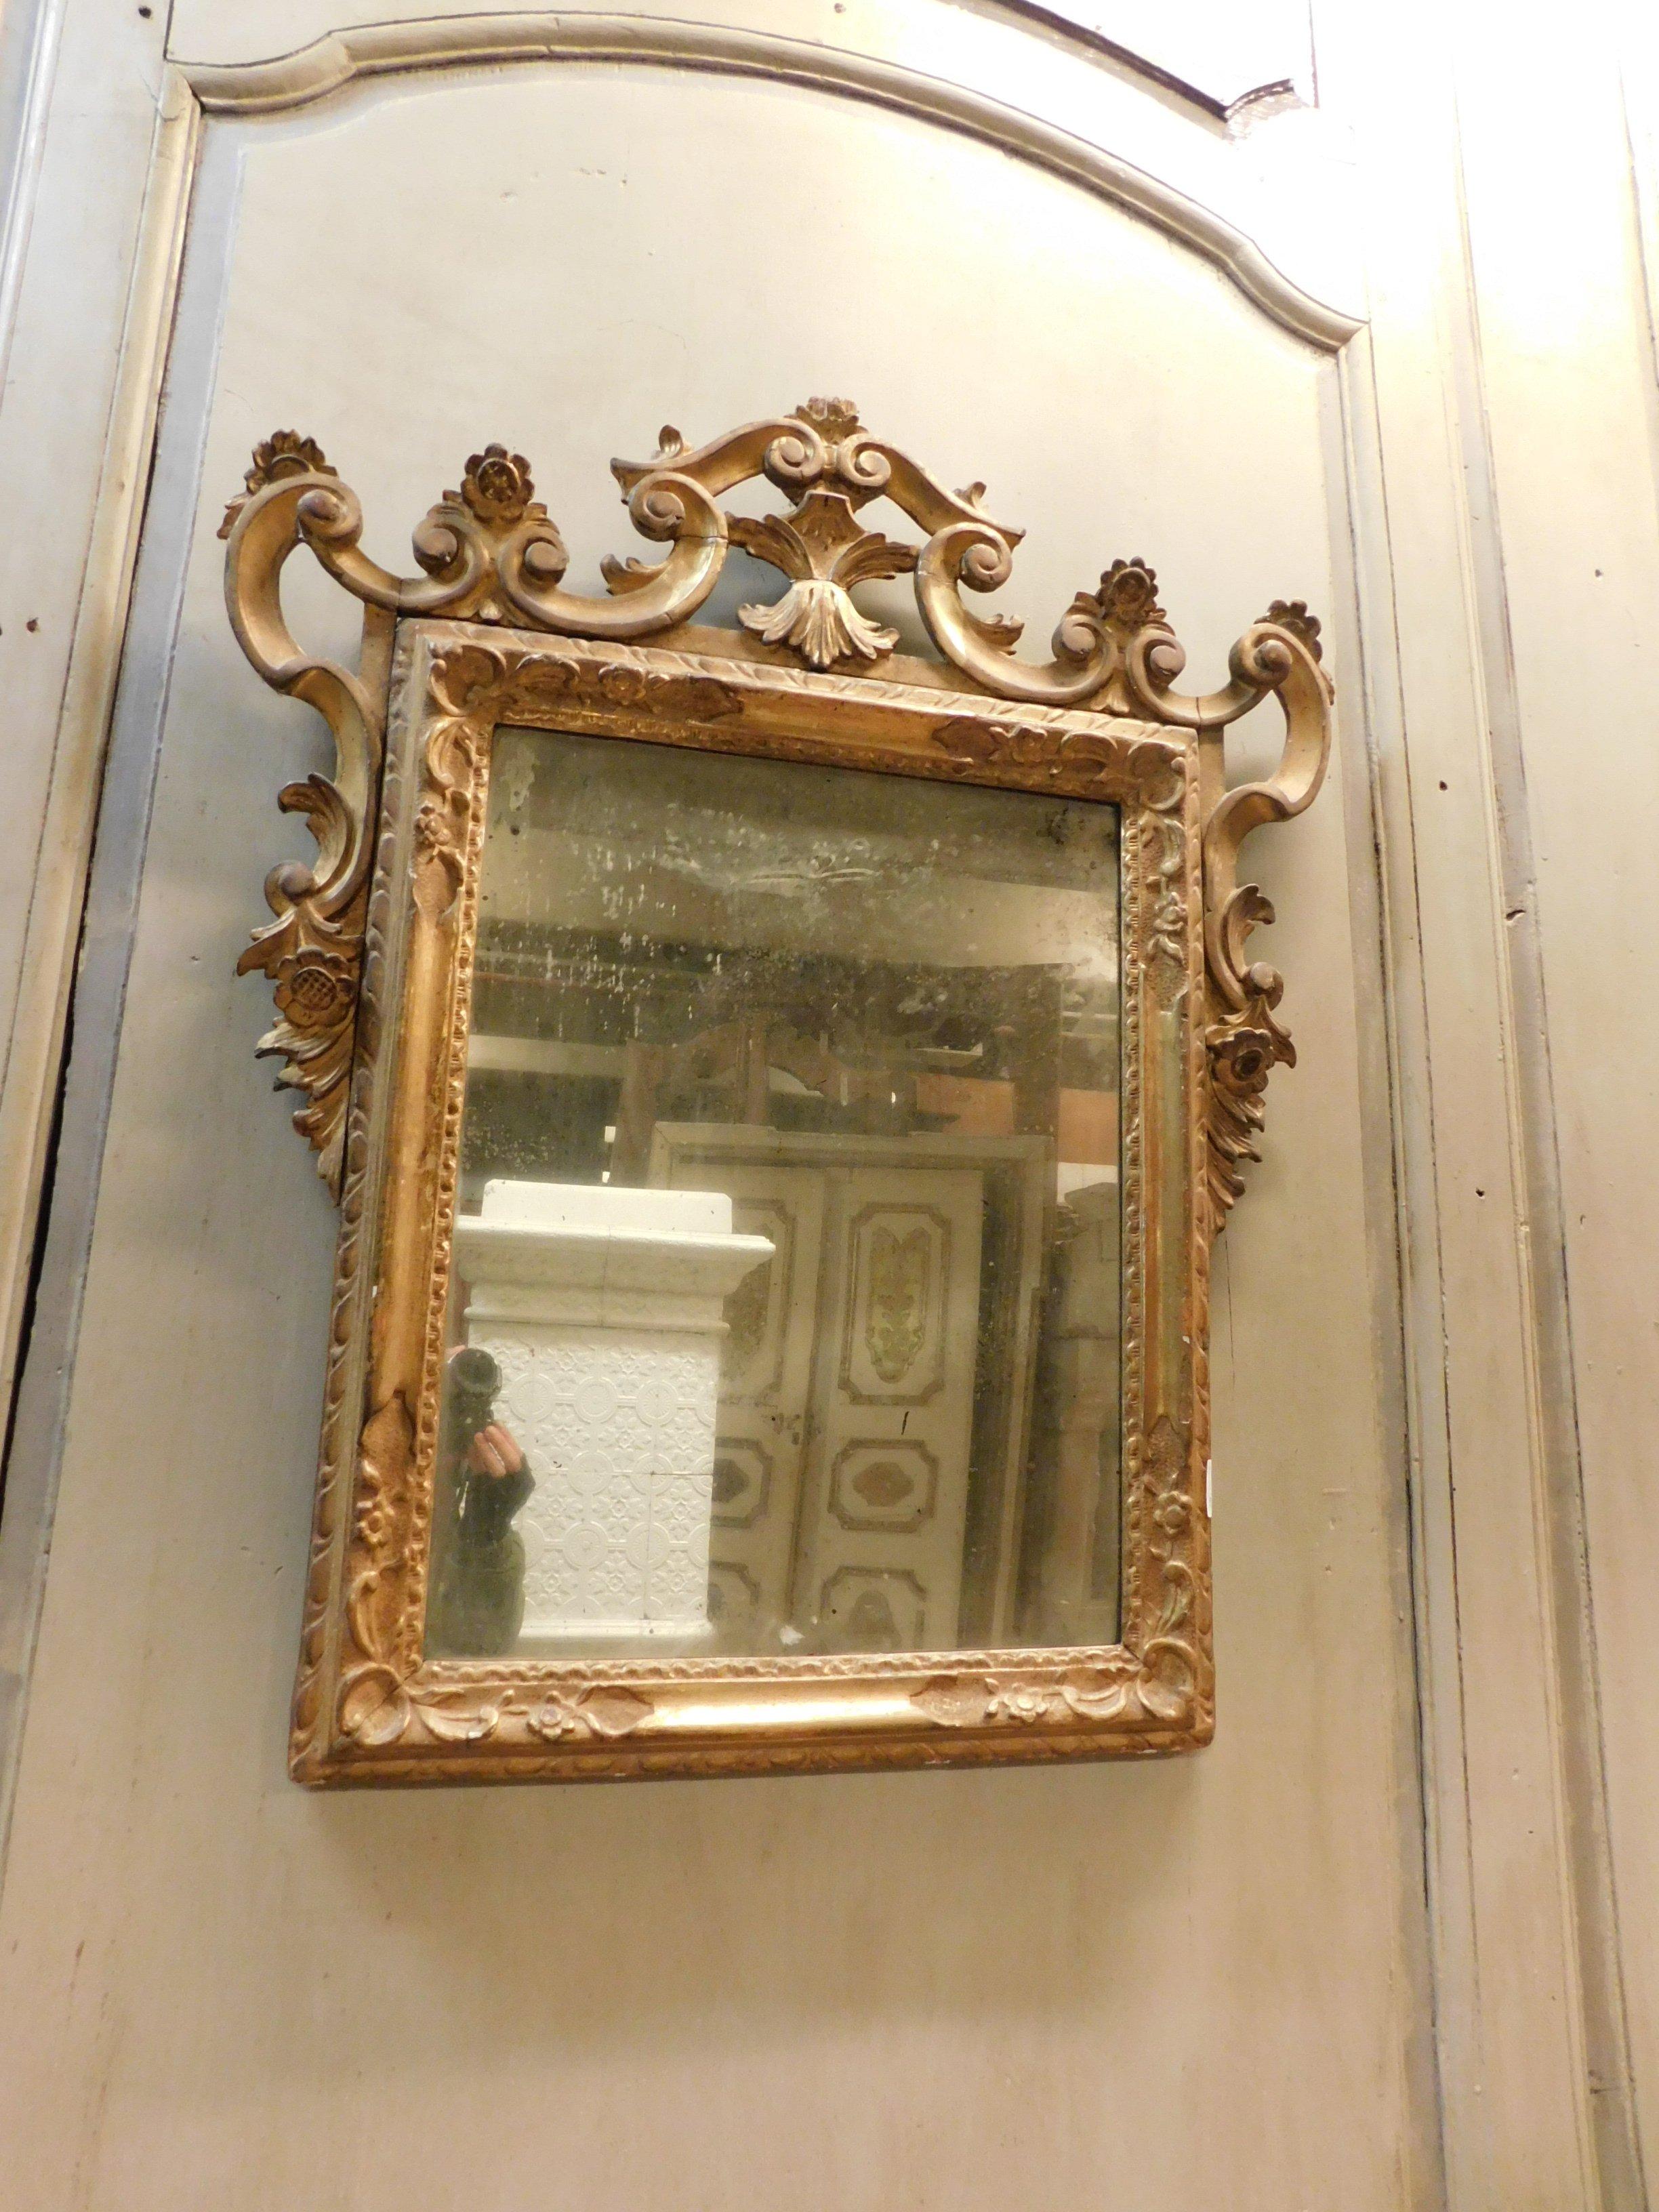 Italian Antique Gilded Mirror with Carved Wood Carvings, 18th Century, Italy